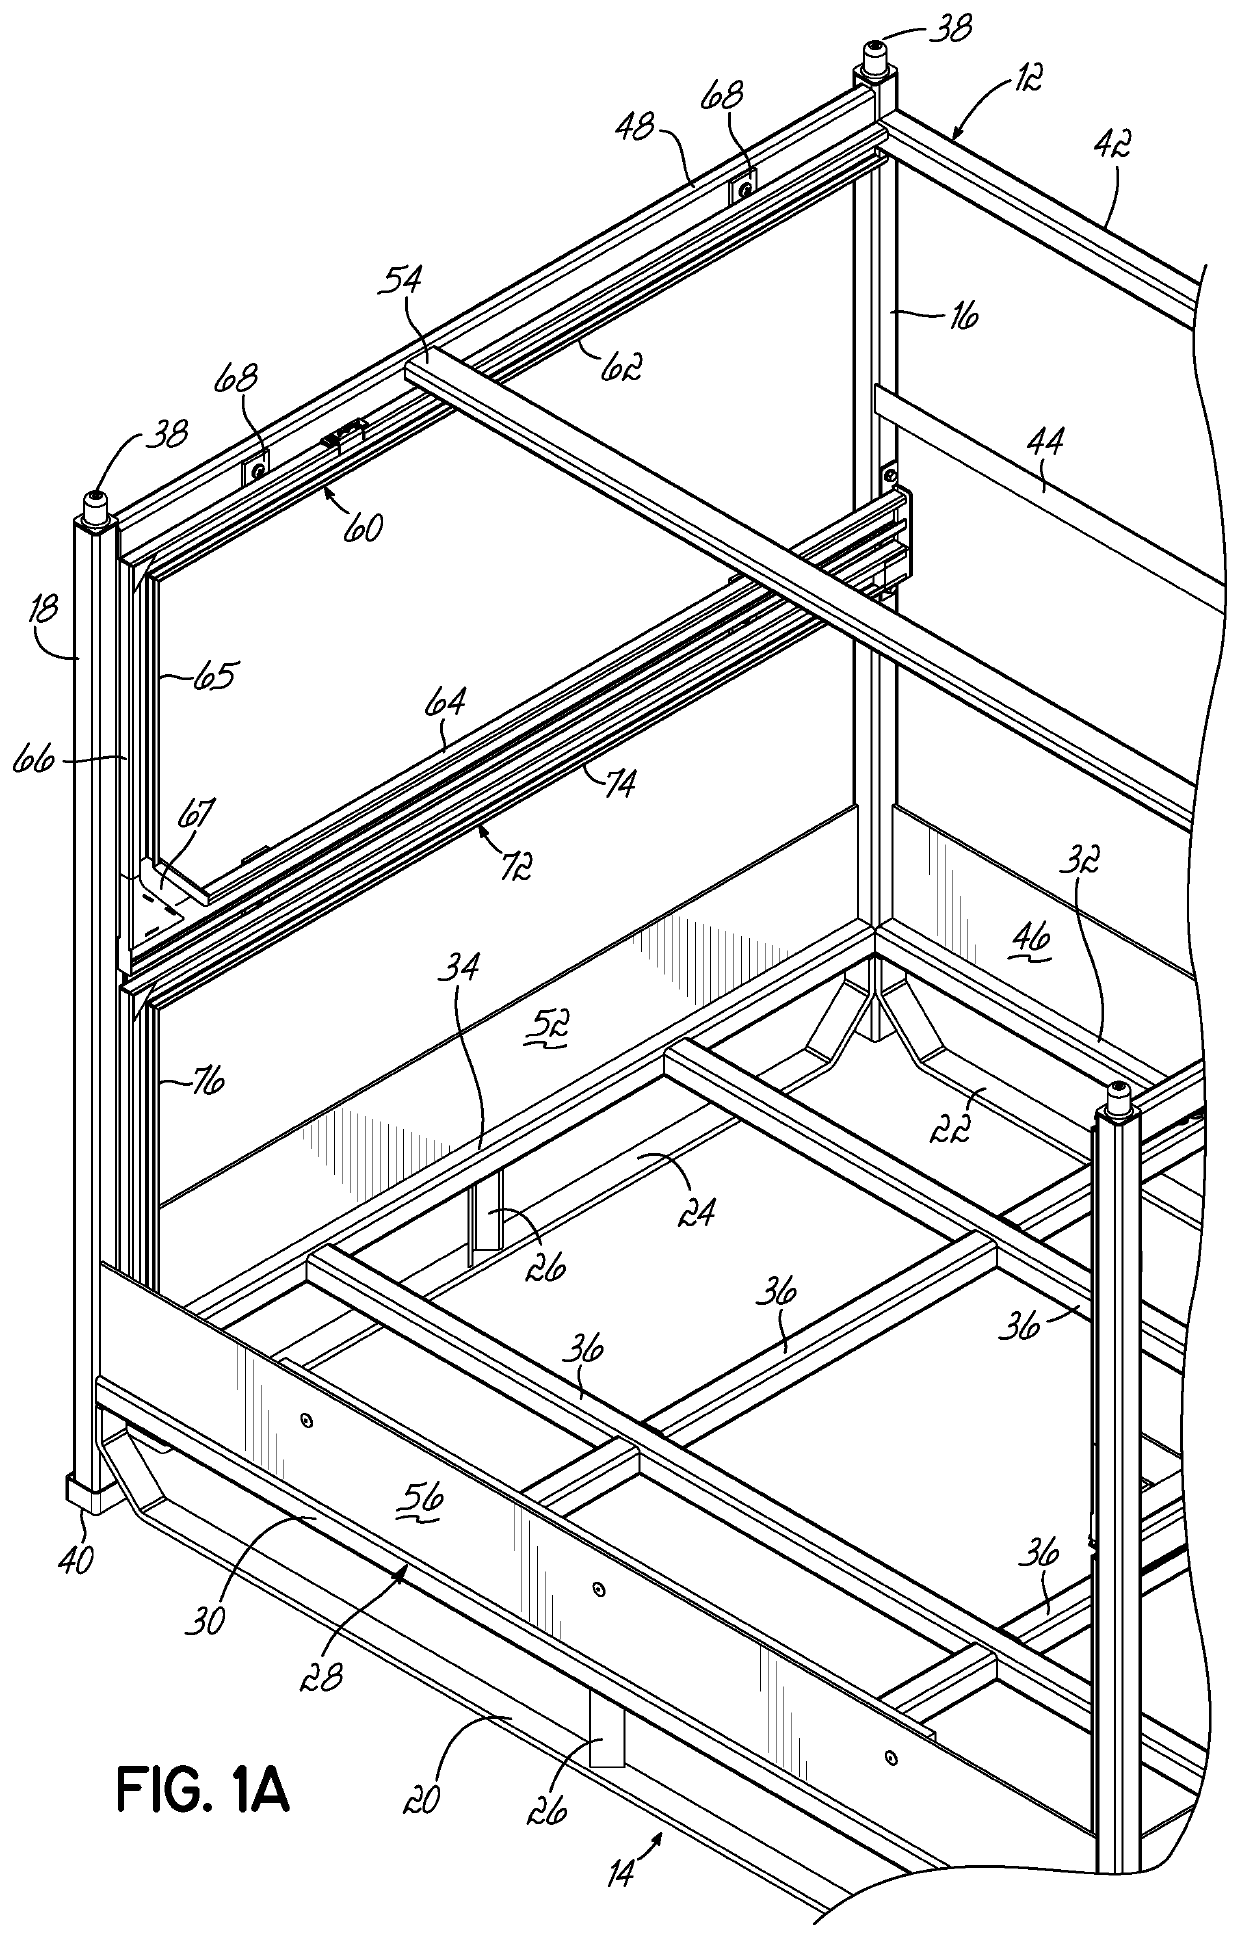 Container having multiple layers of dunnage, at least one layer having at least one lockable crossbar assembly